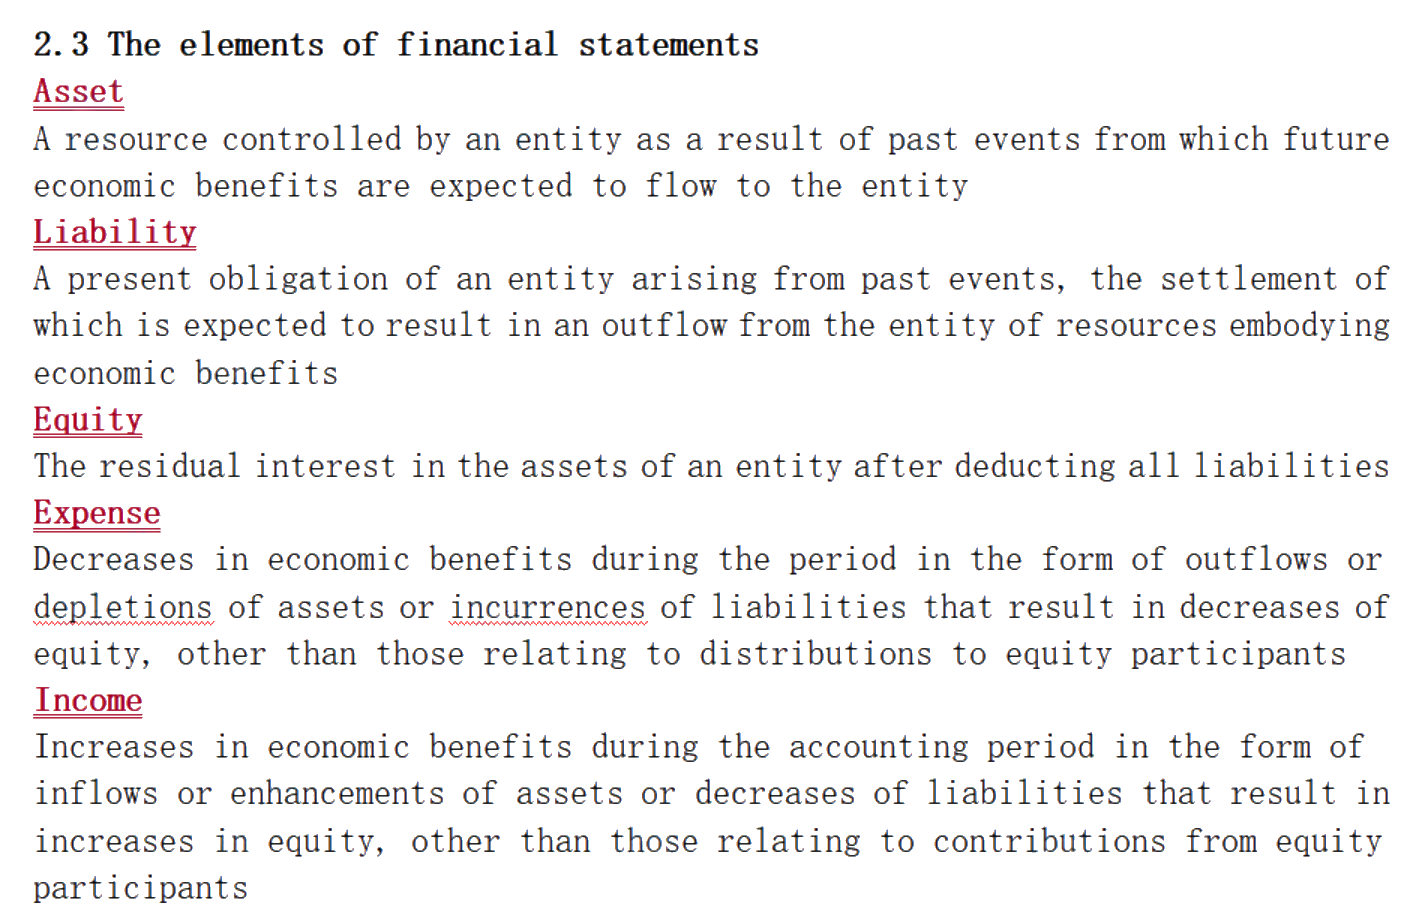 The elements of financial statements